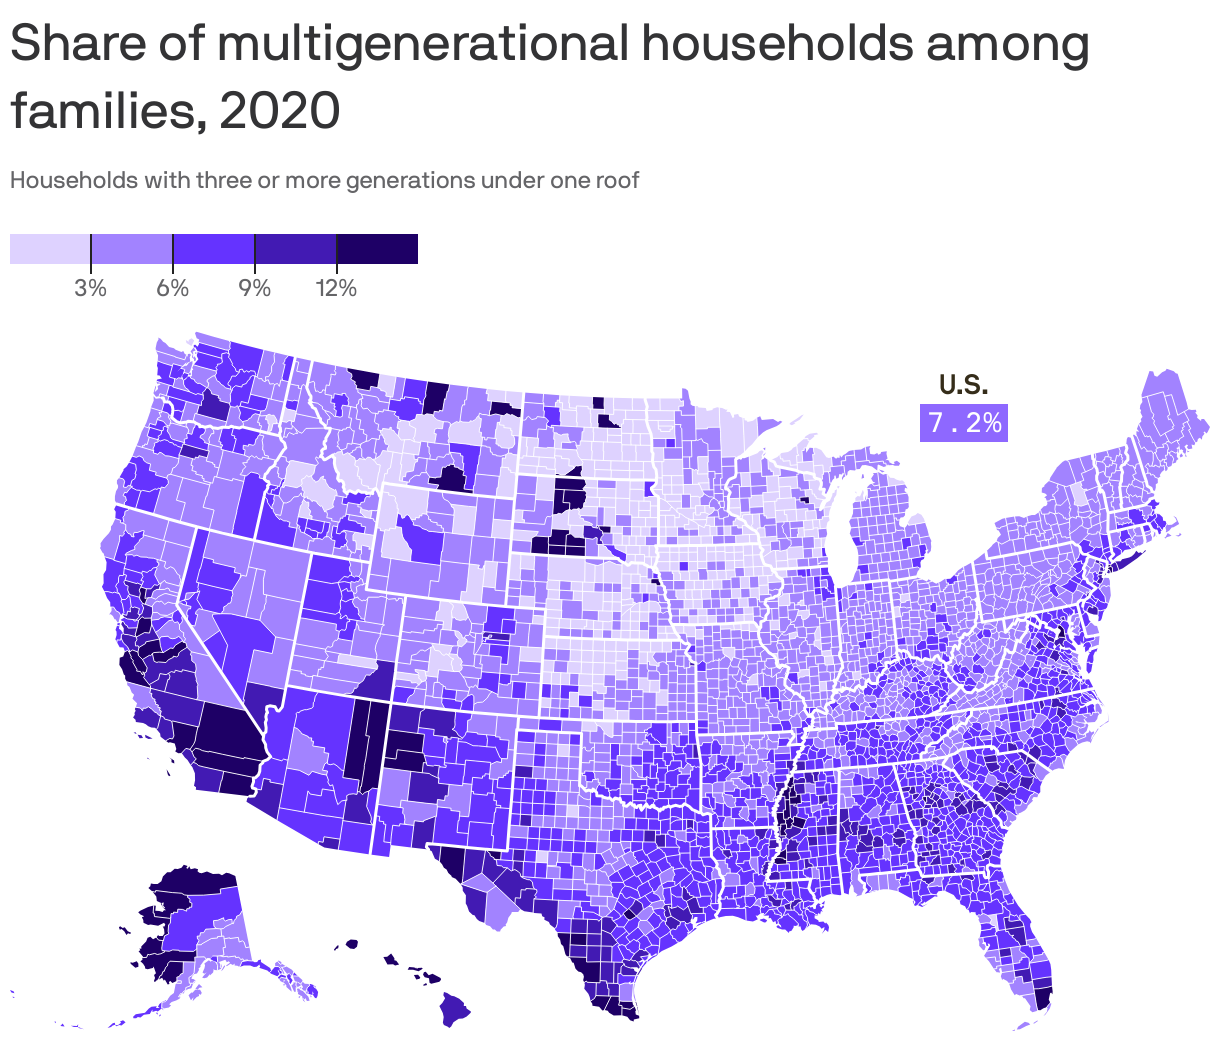 Share of multigenerational households among families, 2020